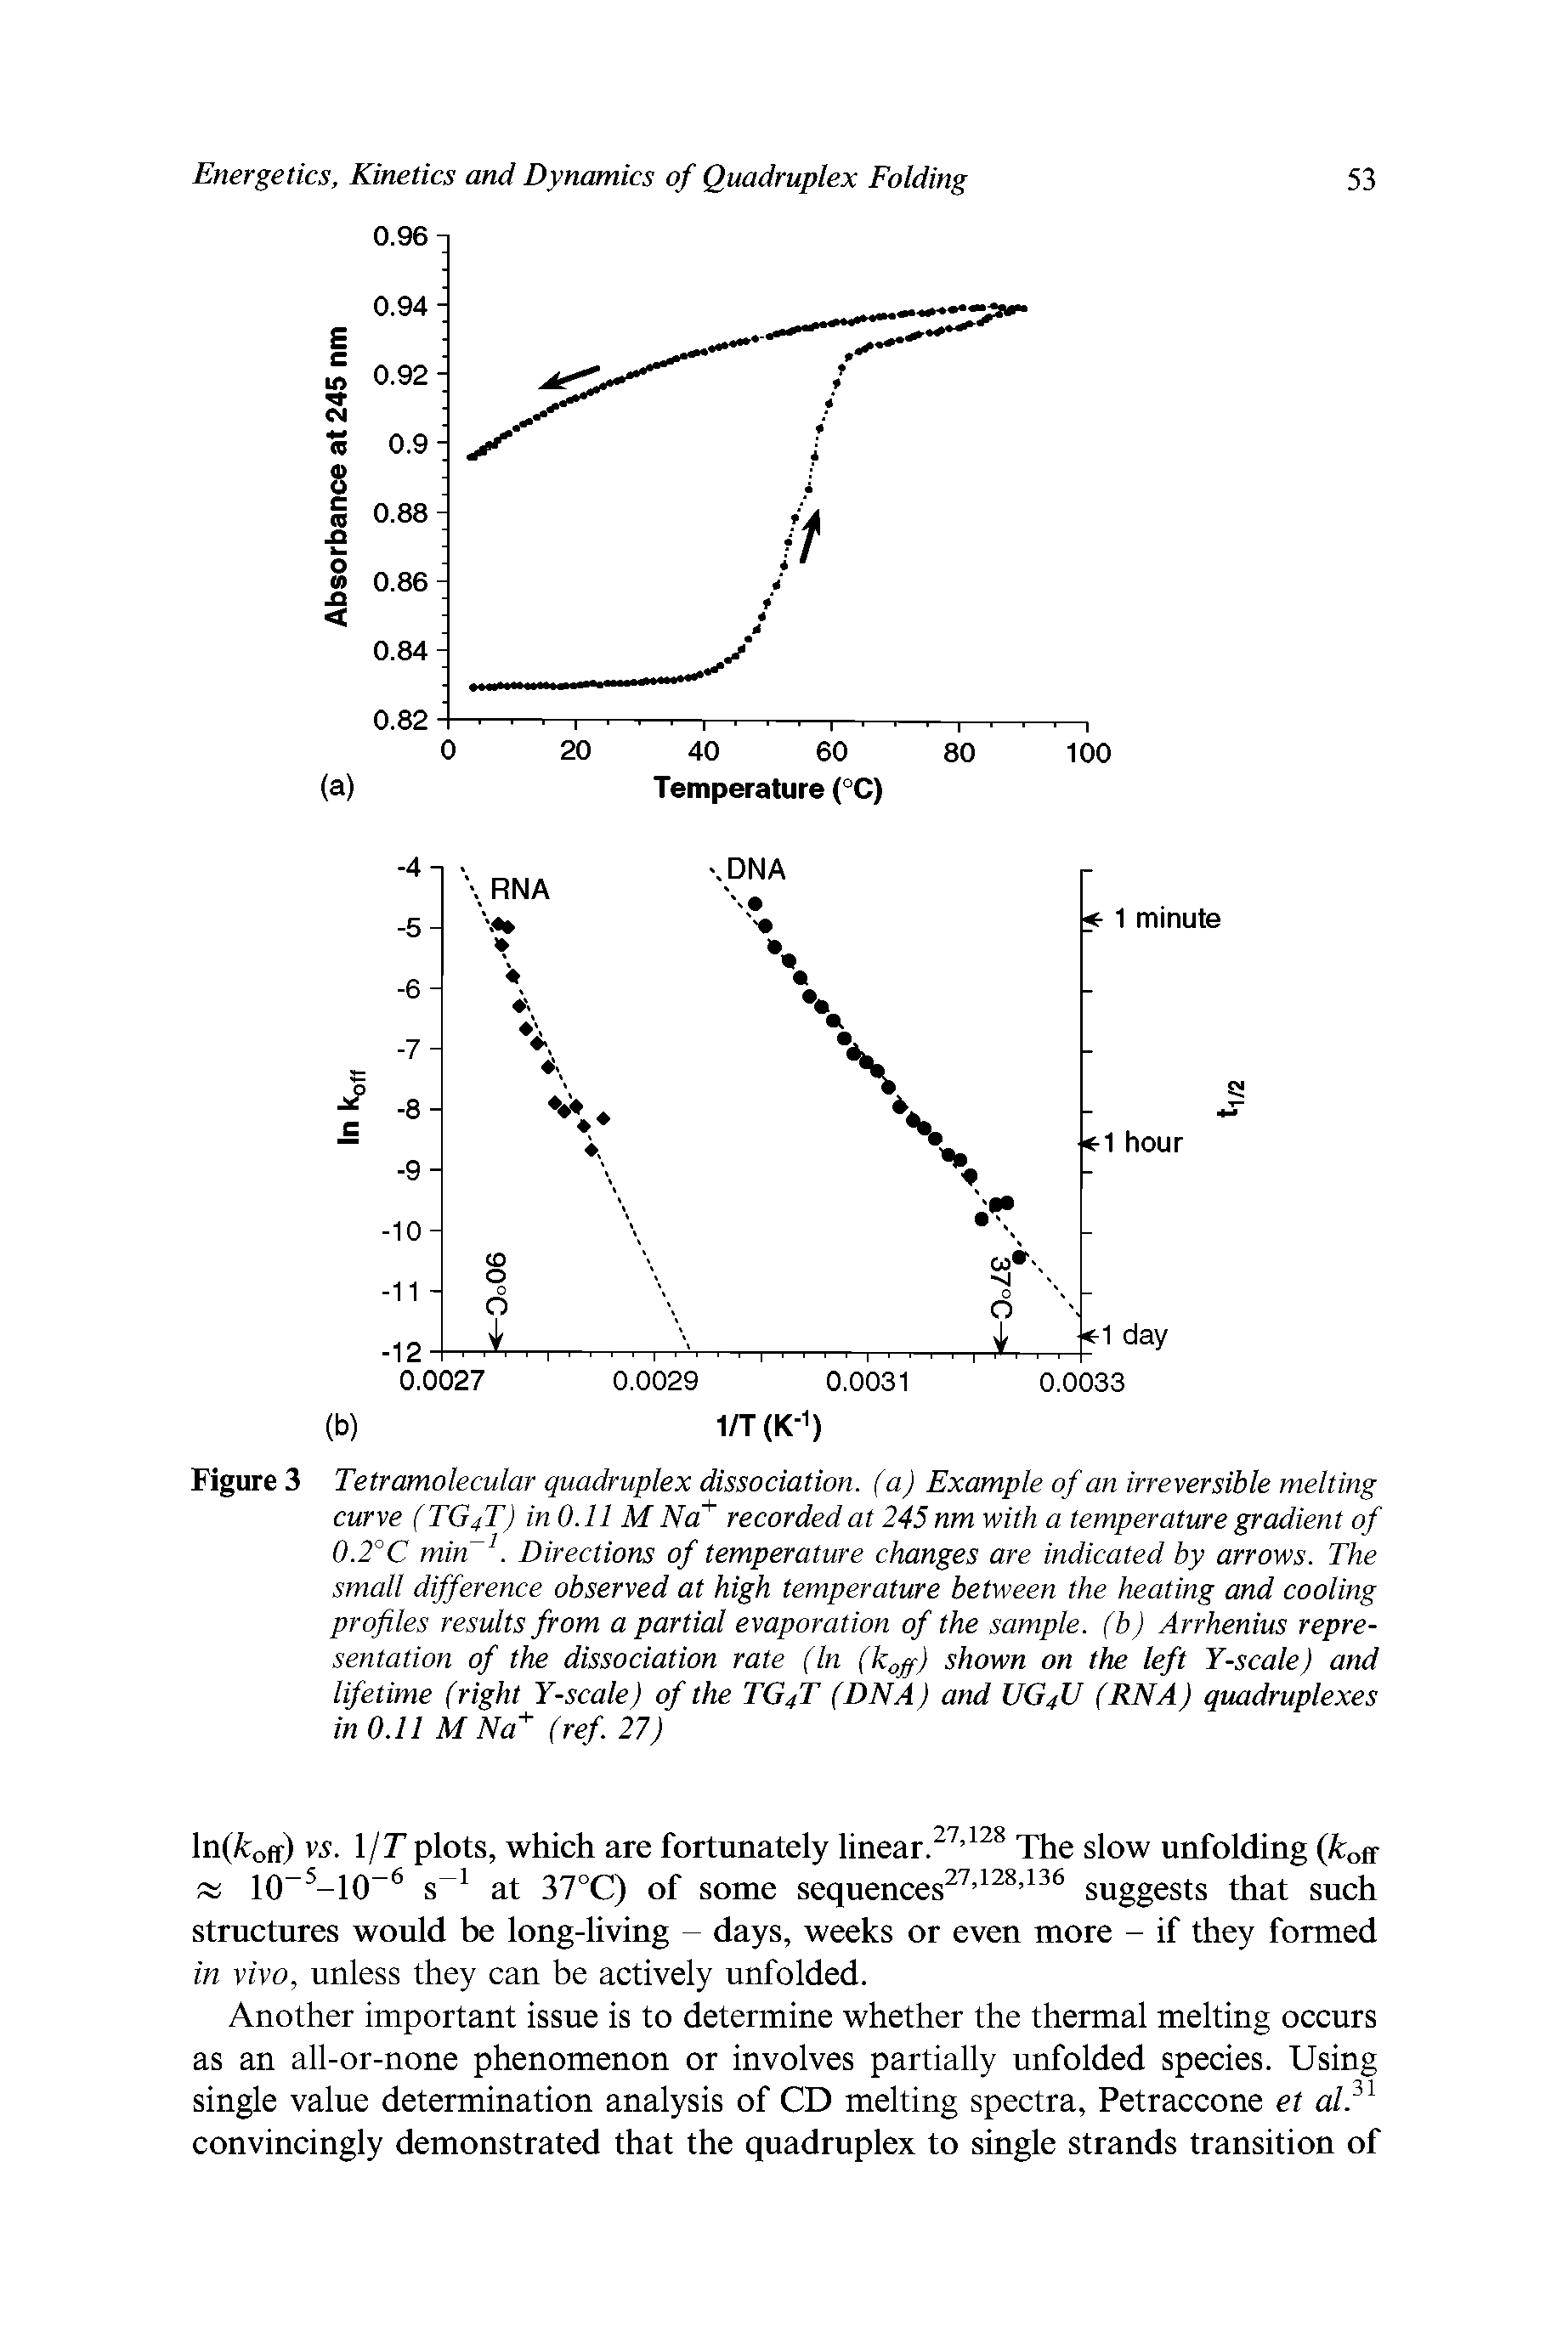 Figure 3 Tetramolecular quadruplex dissociation, (a) Example of an irreversible melting curve (TG4T) in 0.11 M Na recorded at 245 nm with a temperature gradient of 0.2°C min Directions of temperature changes are indicated by arrows. The small difference observed at high temperature between the heating and cooling profiles results from a partial evaporation of the sample, (b) Arrhenius representation of the dissociation rate (In (k ff) shown on the left Y-scale) and lifetime (right Y-scale) of the TG4T (DNA) and IIG4U (RNA) quadruplexes in 0.11 M Na" (ref 27)...